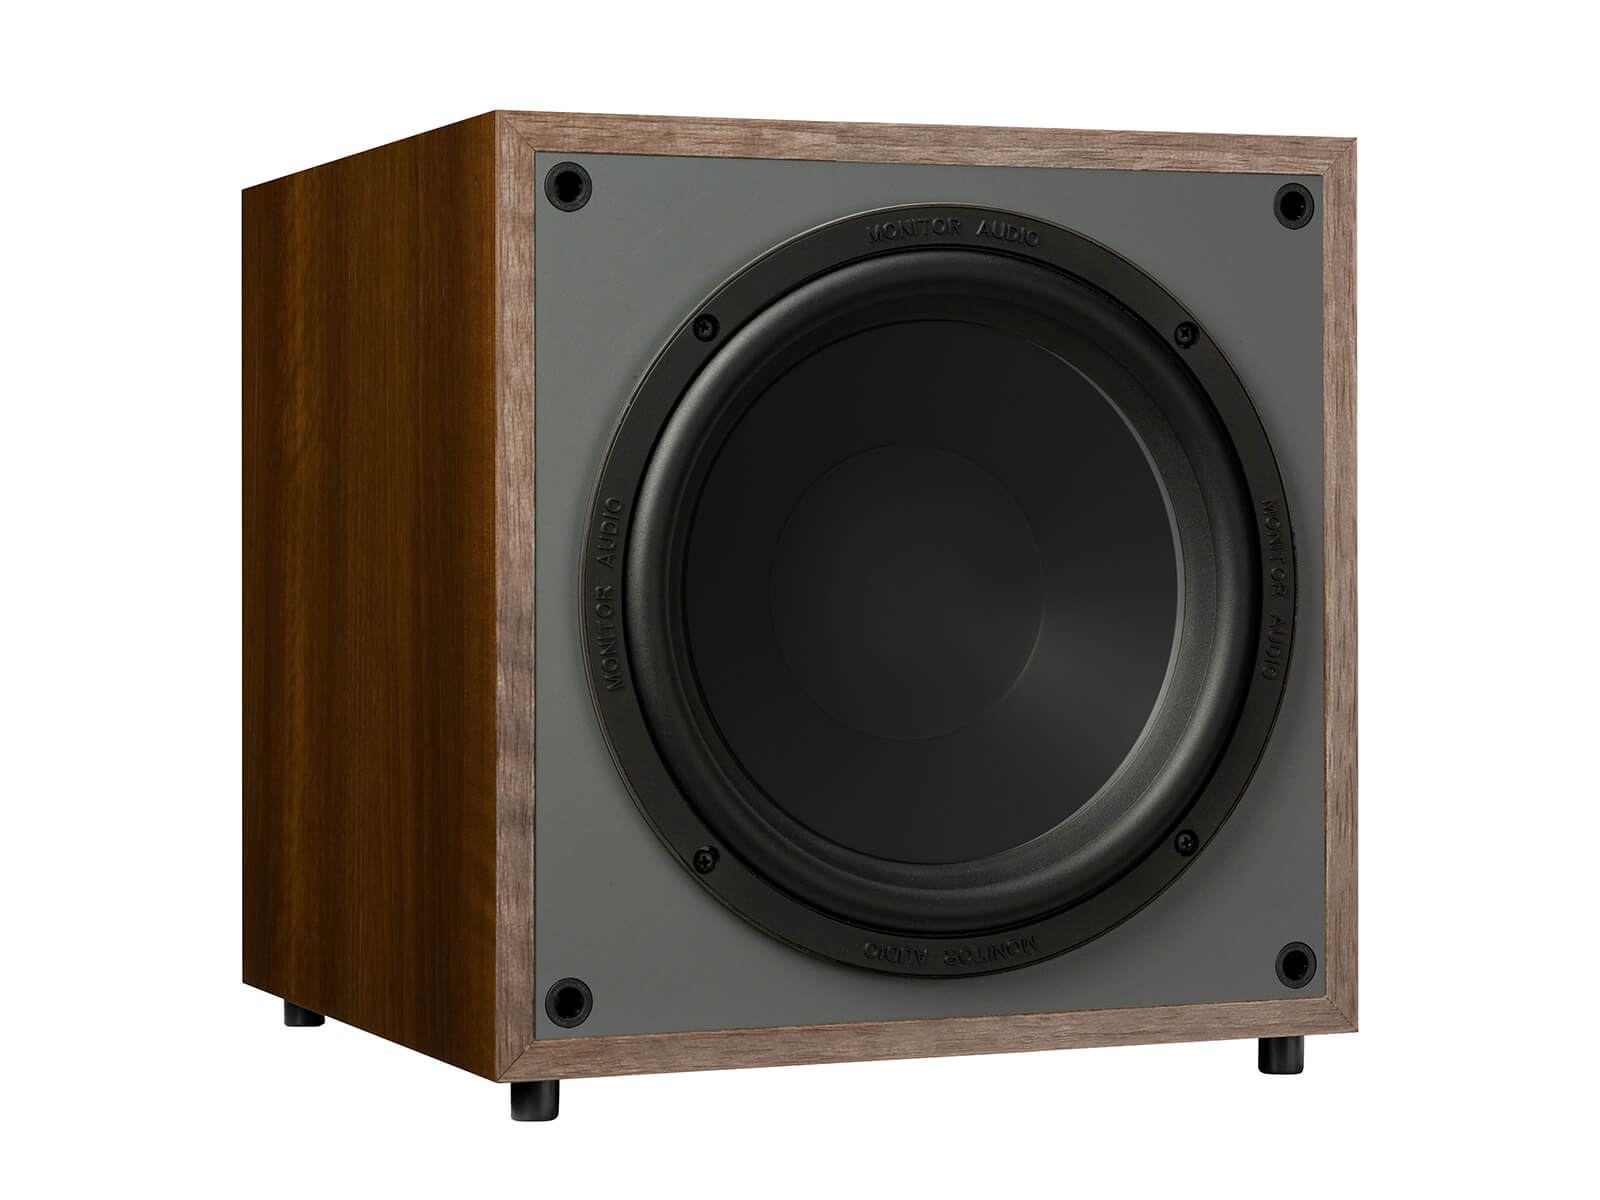 Monitor MRW-10, grille-less subwoofer, with a walnut vinyl finish.